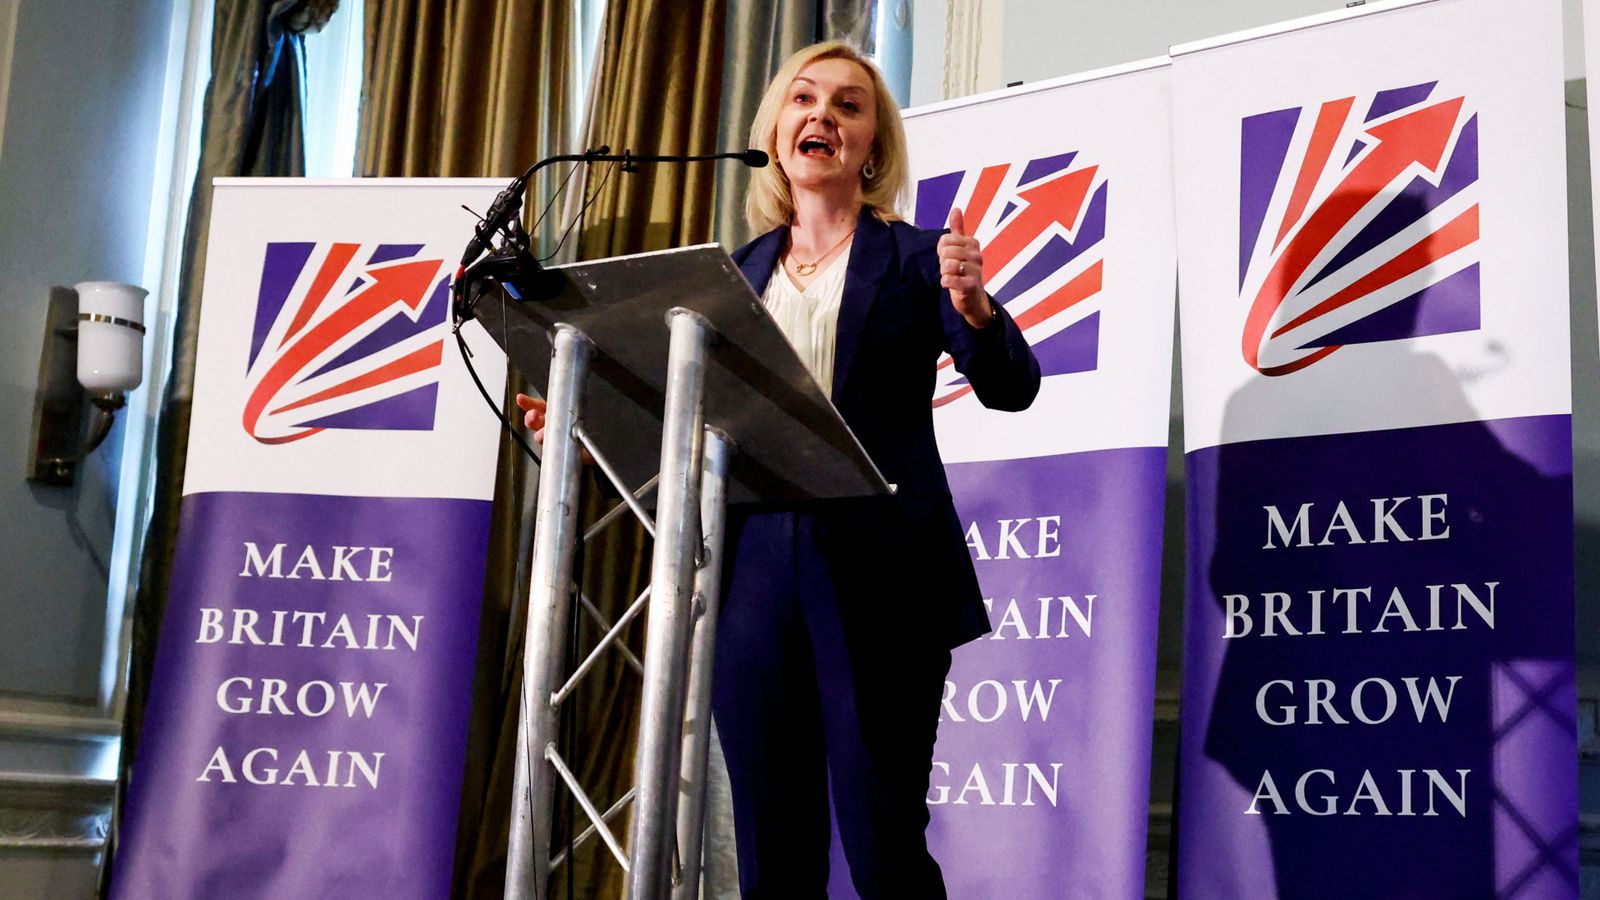 Liz Truss: 'Make Britain grow again' - ex-PM echoes Donald Trump as grassroots Tories welcome her to conference